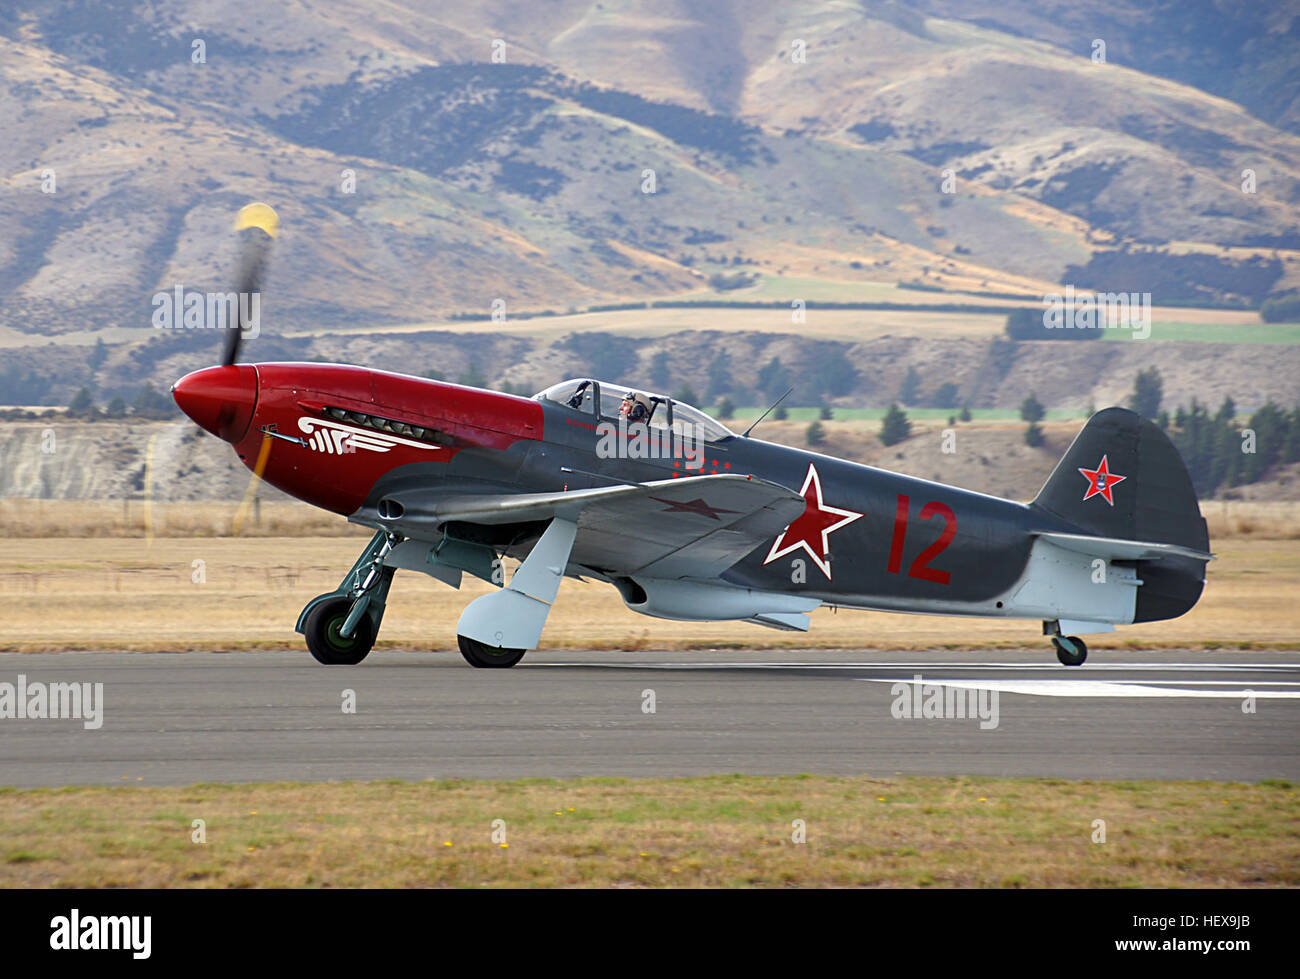 The Yak 3 was regarded as one of the finest interceptors of WWII and was nicknamed &quot;Dogfighter Supreme.&quot; Luftwaffe pilots became accustomed to shooting down poorly equiped, hastily trained Russians.   The Yak-3 entered service in 1944, constructed in plywood instead of fabric covering the rear fuselage, mastless radio antenna, reflector gunsight and improved armor and engine cooling. Armed with a single 20 mm ShVAK cannon and one 12.7 mm UBS machine gun, it was  a forgiving, easy-to-handle aircraft loved by both rookie and veteran pilots and ground crew as well. It was robust, easy t Stock Photo